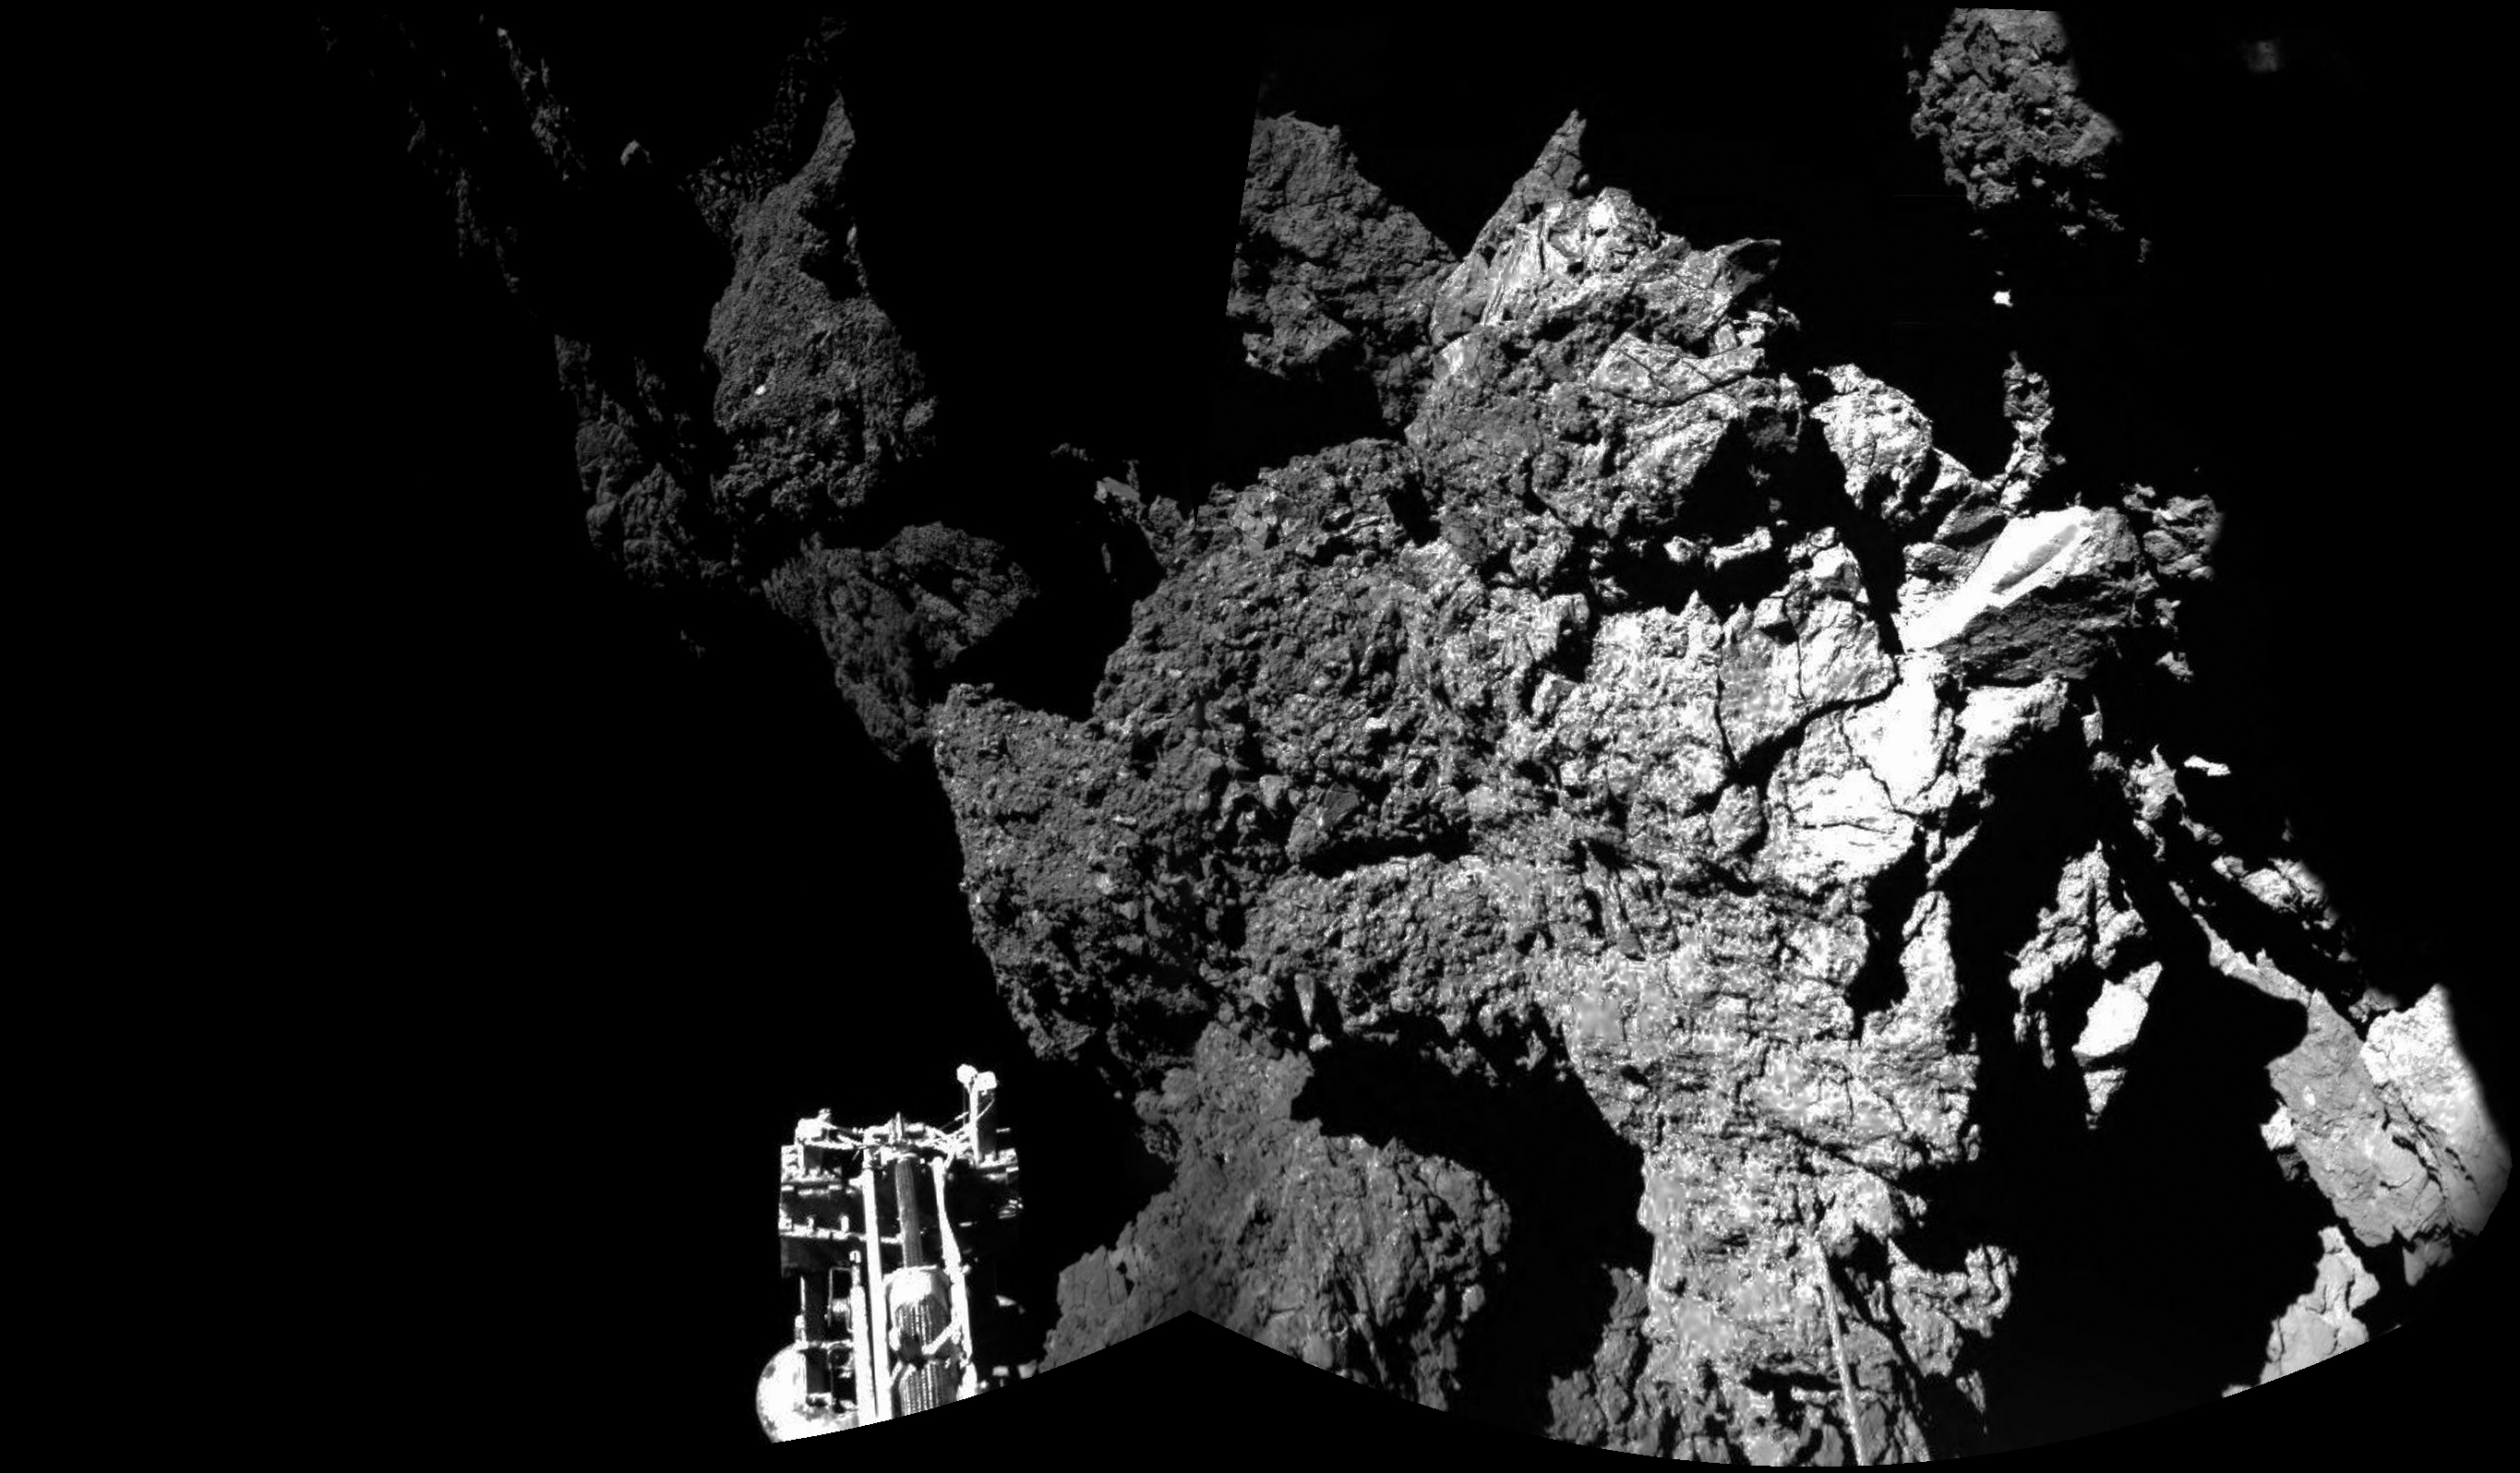 From ESA, "Welcome to a Comet": "Philae's view of the cliffs at Abydos. One of the lander's three feet can be seen in the foreground." Image Credit: ESA/Rosetta/Philae/CIVA